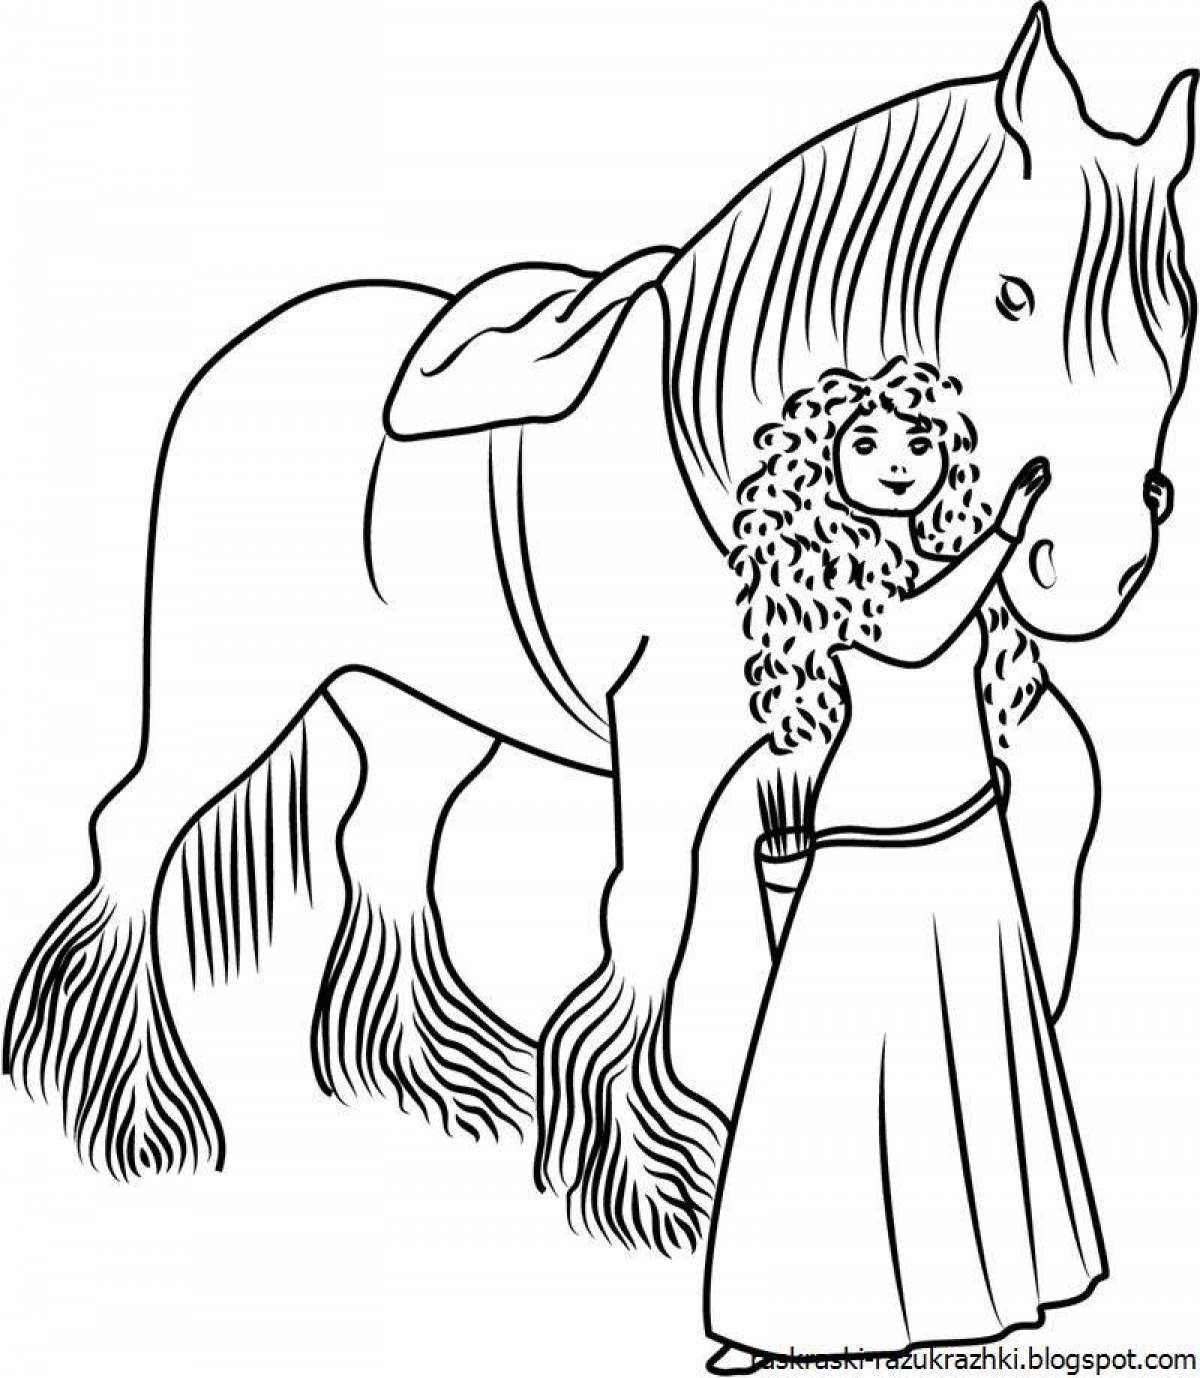 Fun horse coloring for girls